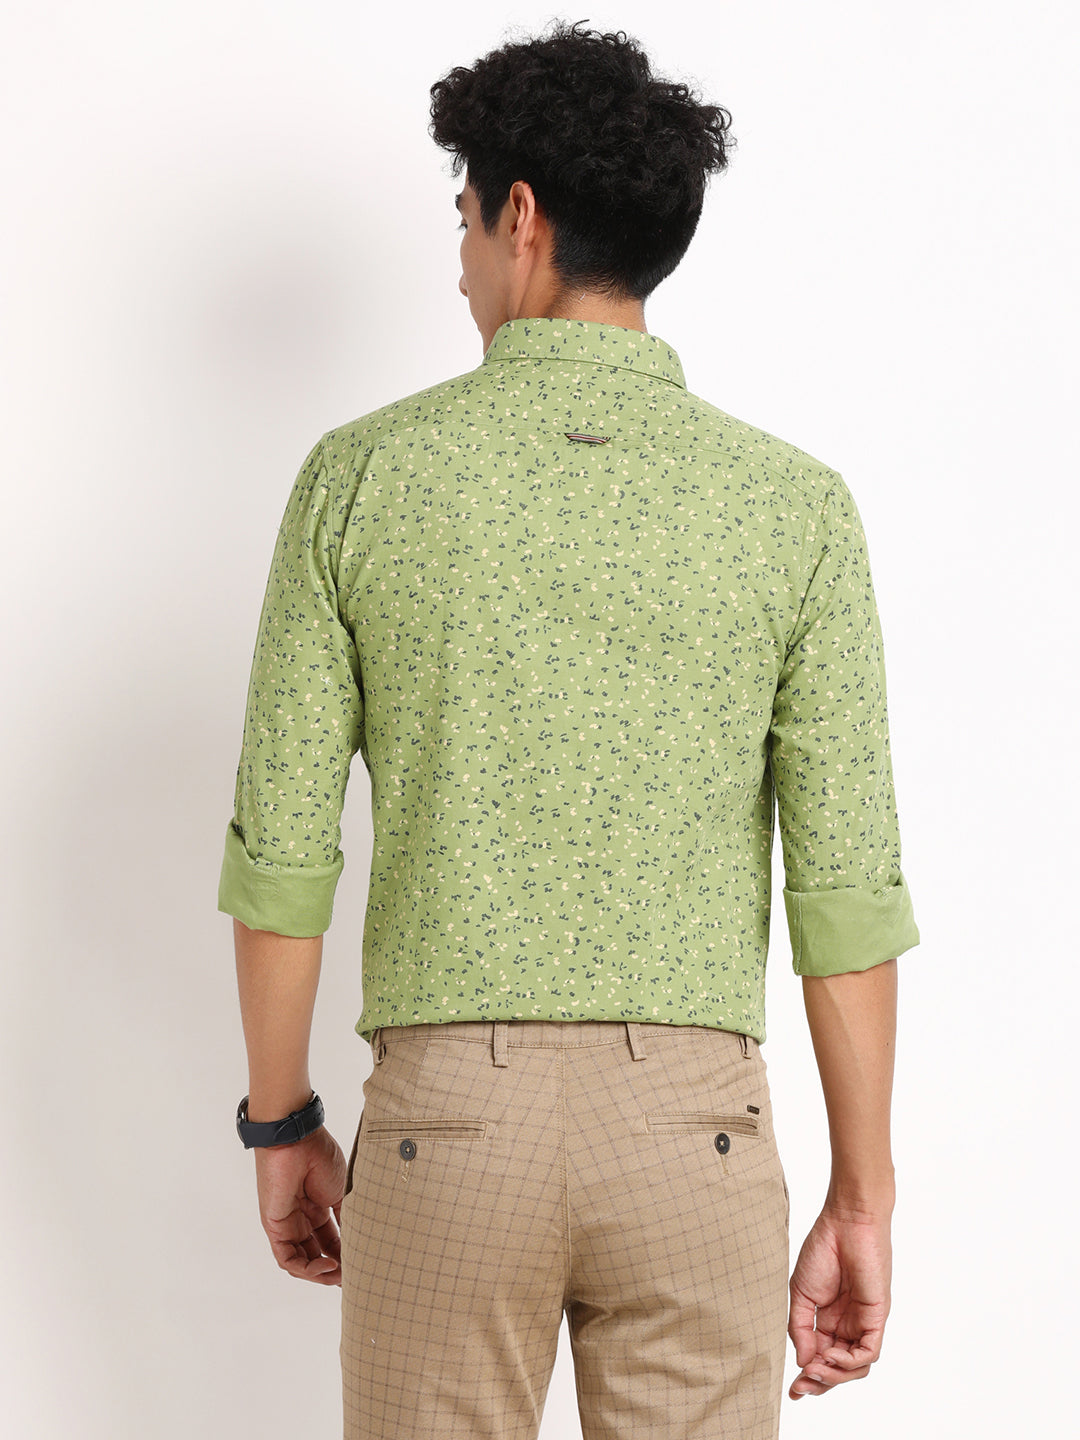 100% Cotton Light Green Printed Slim Fit Full Sleeve Casual Shirt